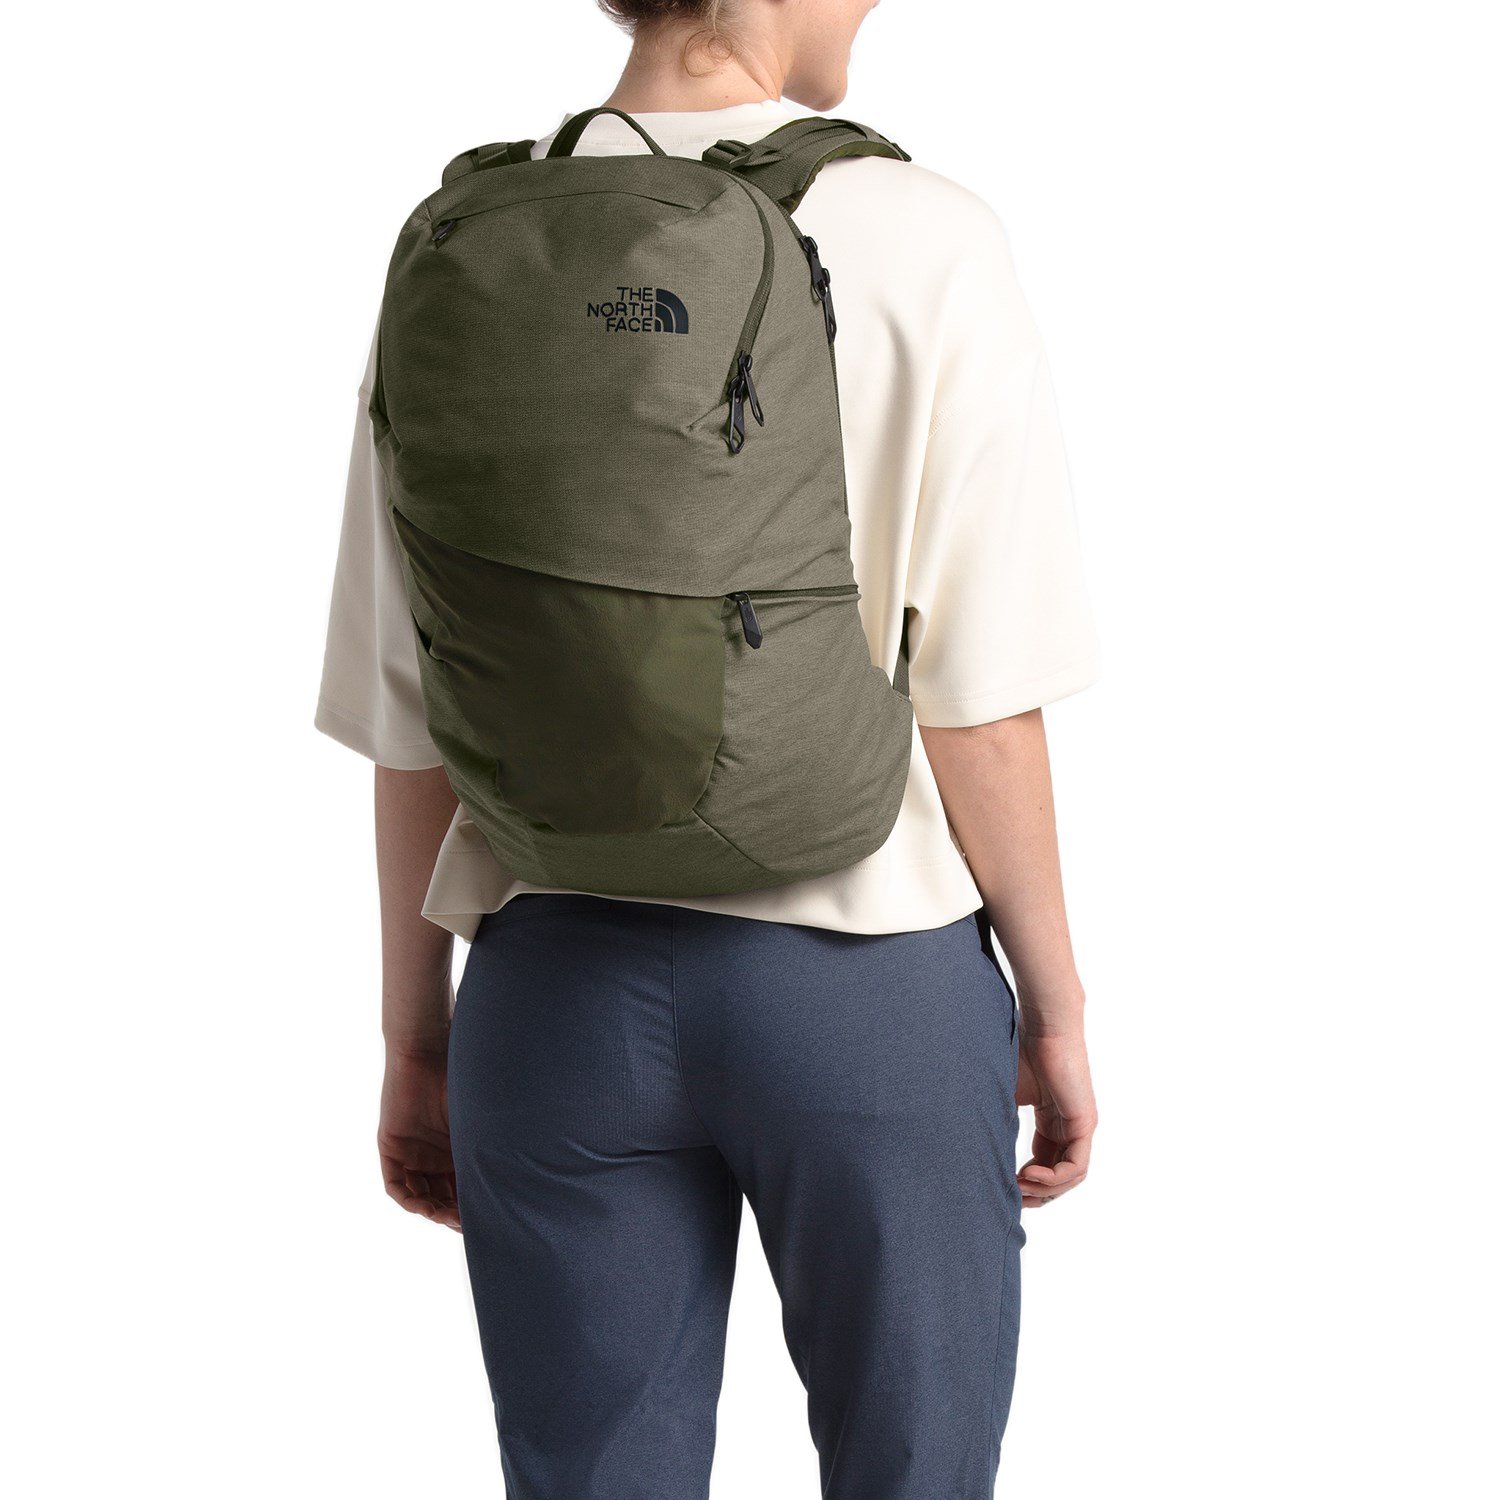 The North Face Aurora Backpack - Women 